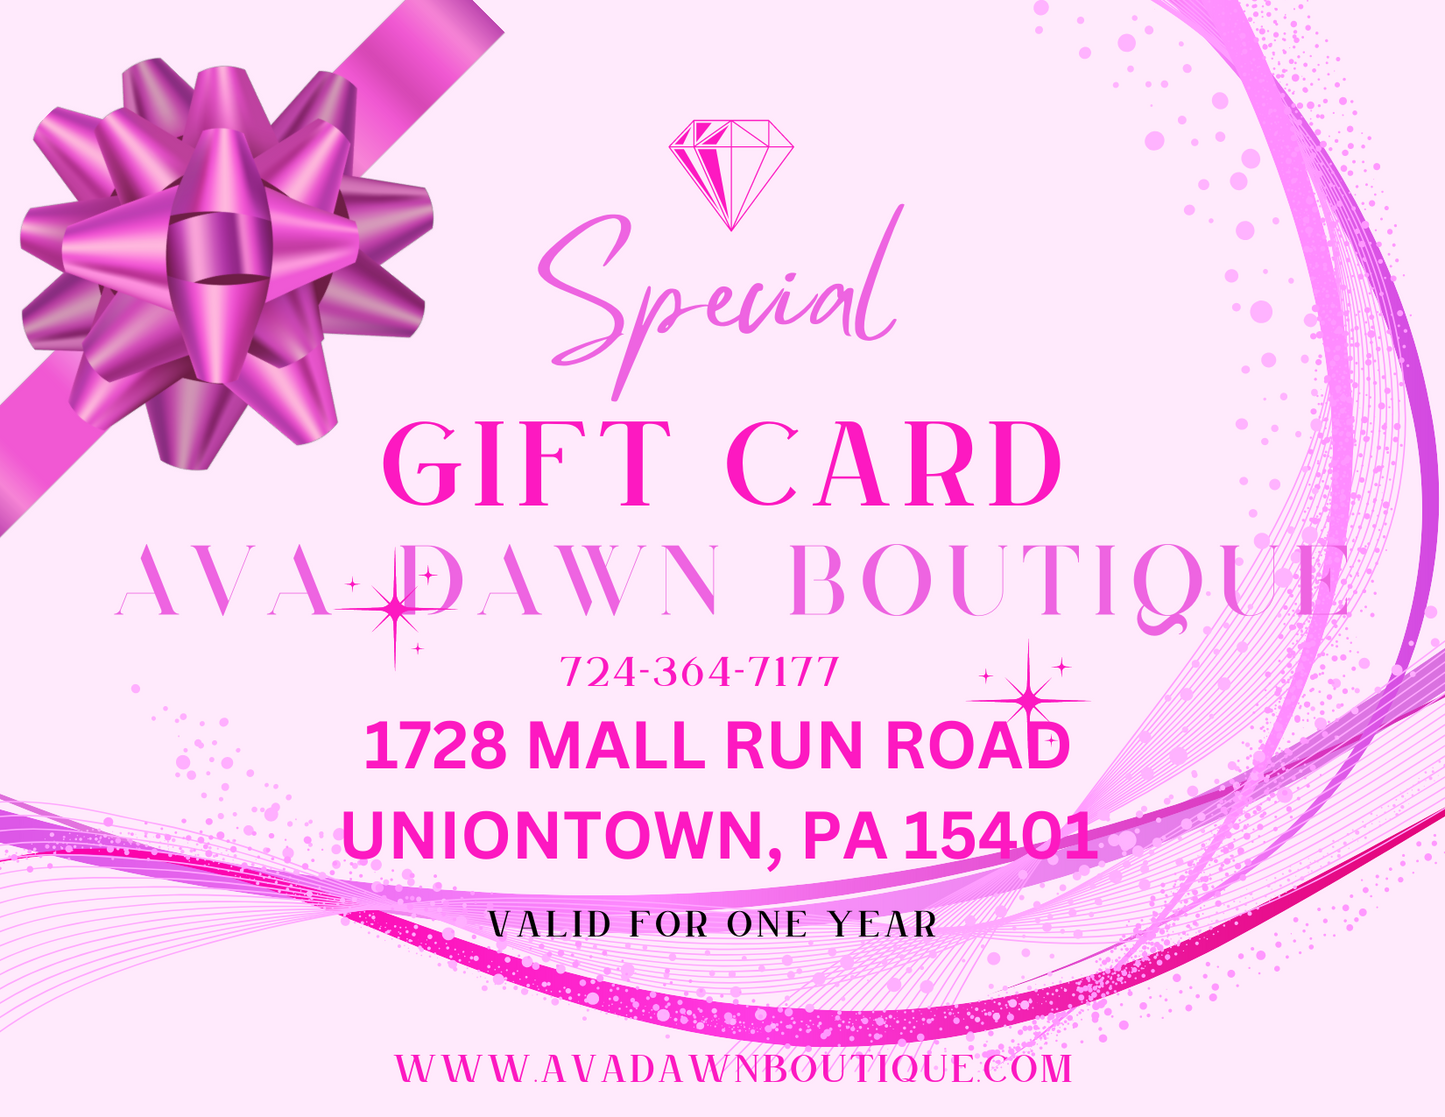 Ava Dawn Boutique Gift Cards